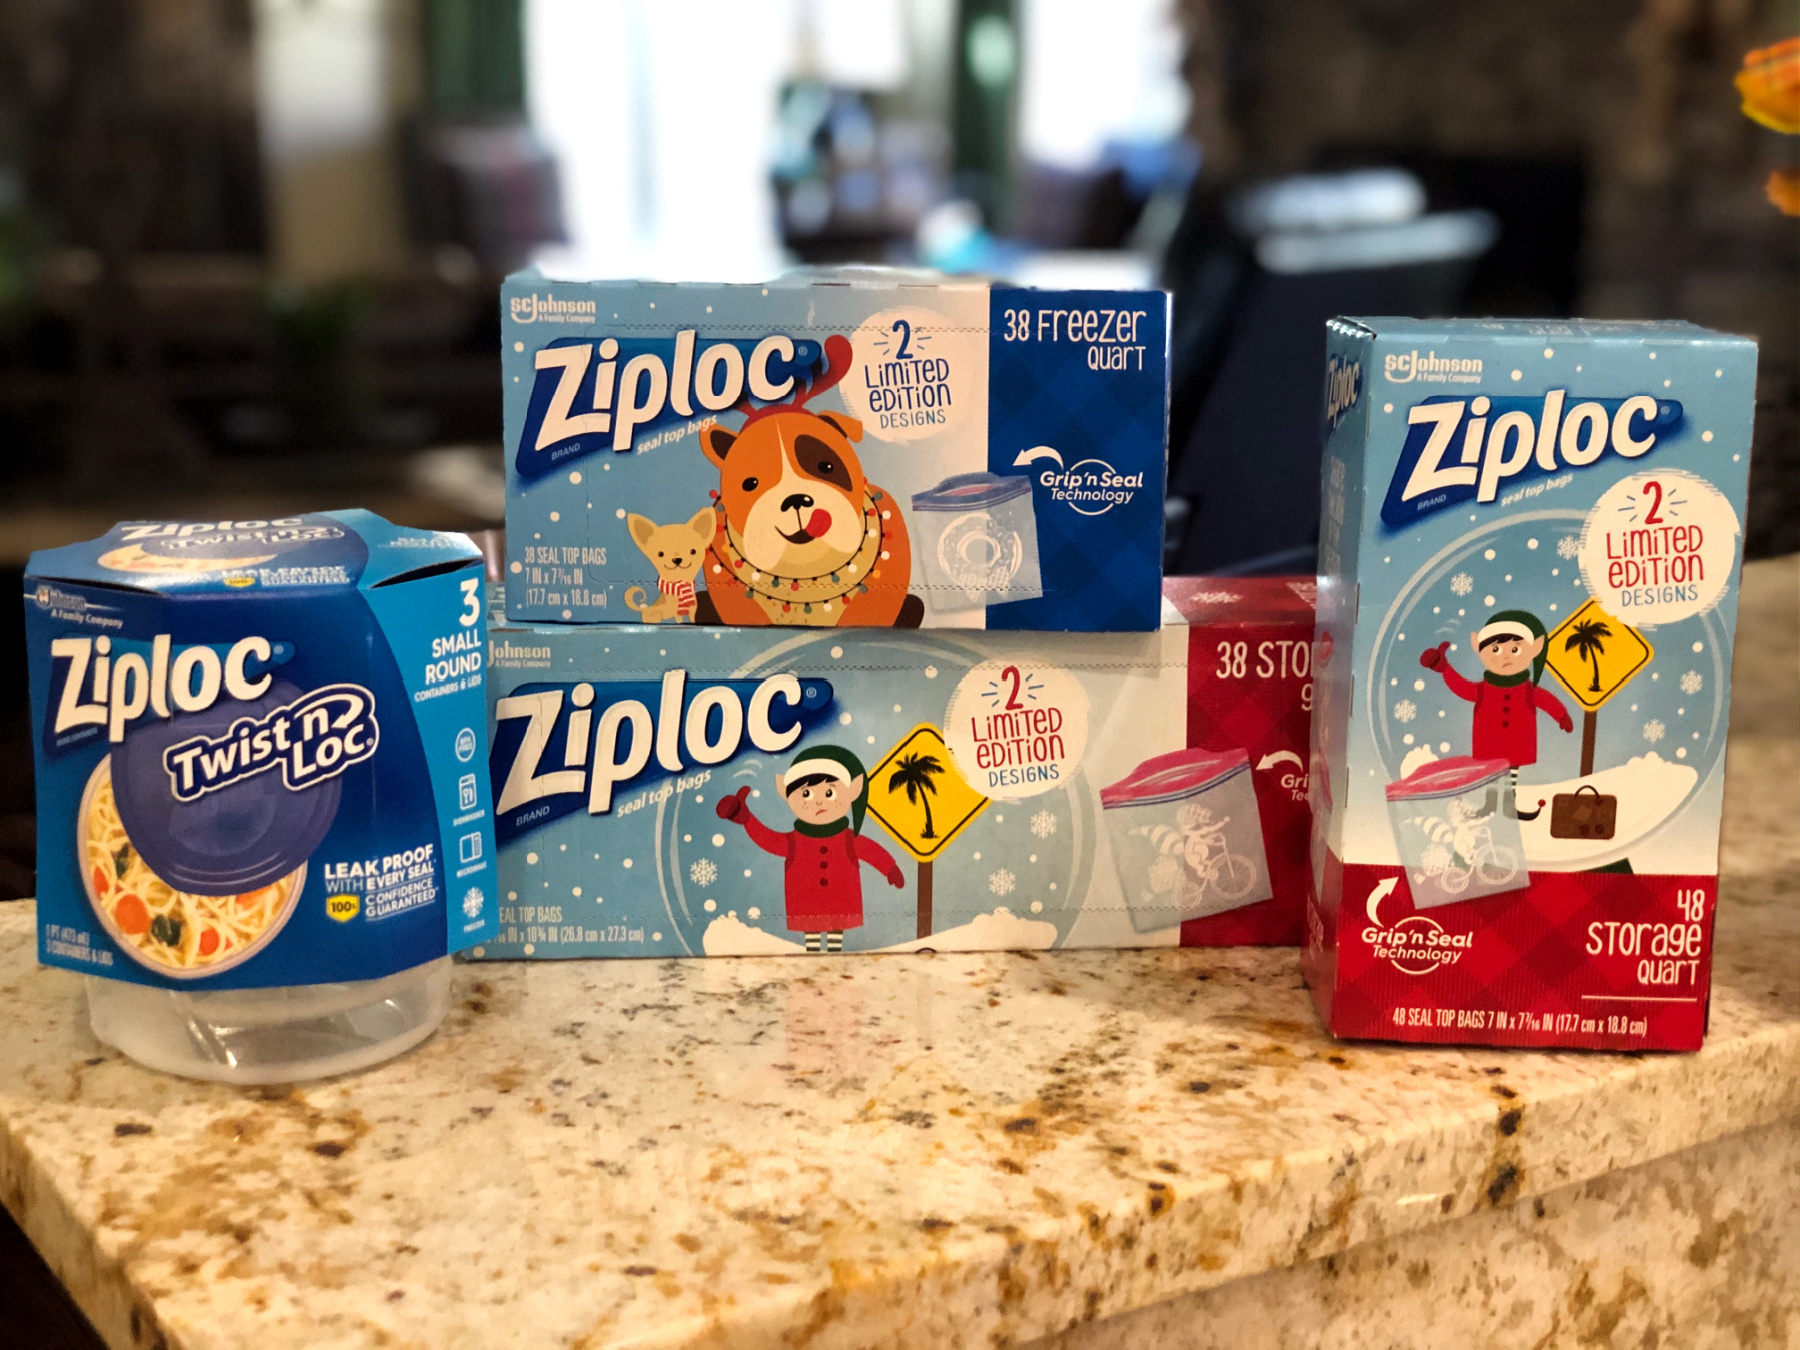 Spread Holiday Cheer With Ziploc® Brand Bags And Containers - Save At Publix on I Heart Publix